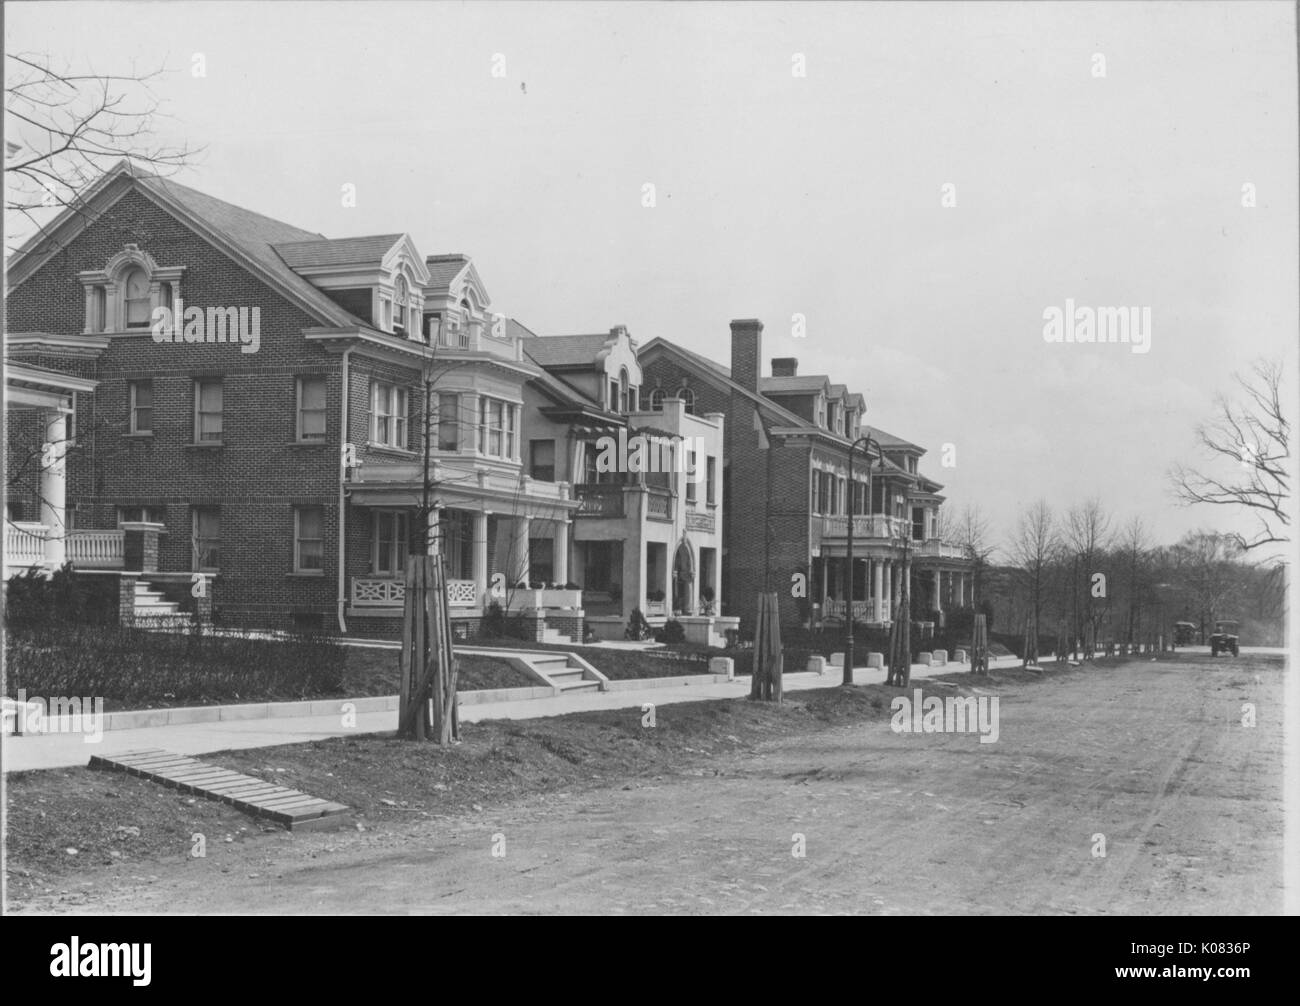 Diagonal shot of row of houses with two stories, steps leading up to complex front porch structures, chimneys depicted, on an unpaved road; Roland Park/Guilford, 1910. This image is from a series documenting the construction and sale of homes in the Roland Park/Guilford neighborhood of Baltimore, a streetcar suburb and one of the first planned communities in the United States. Stock Photo